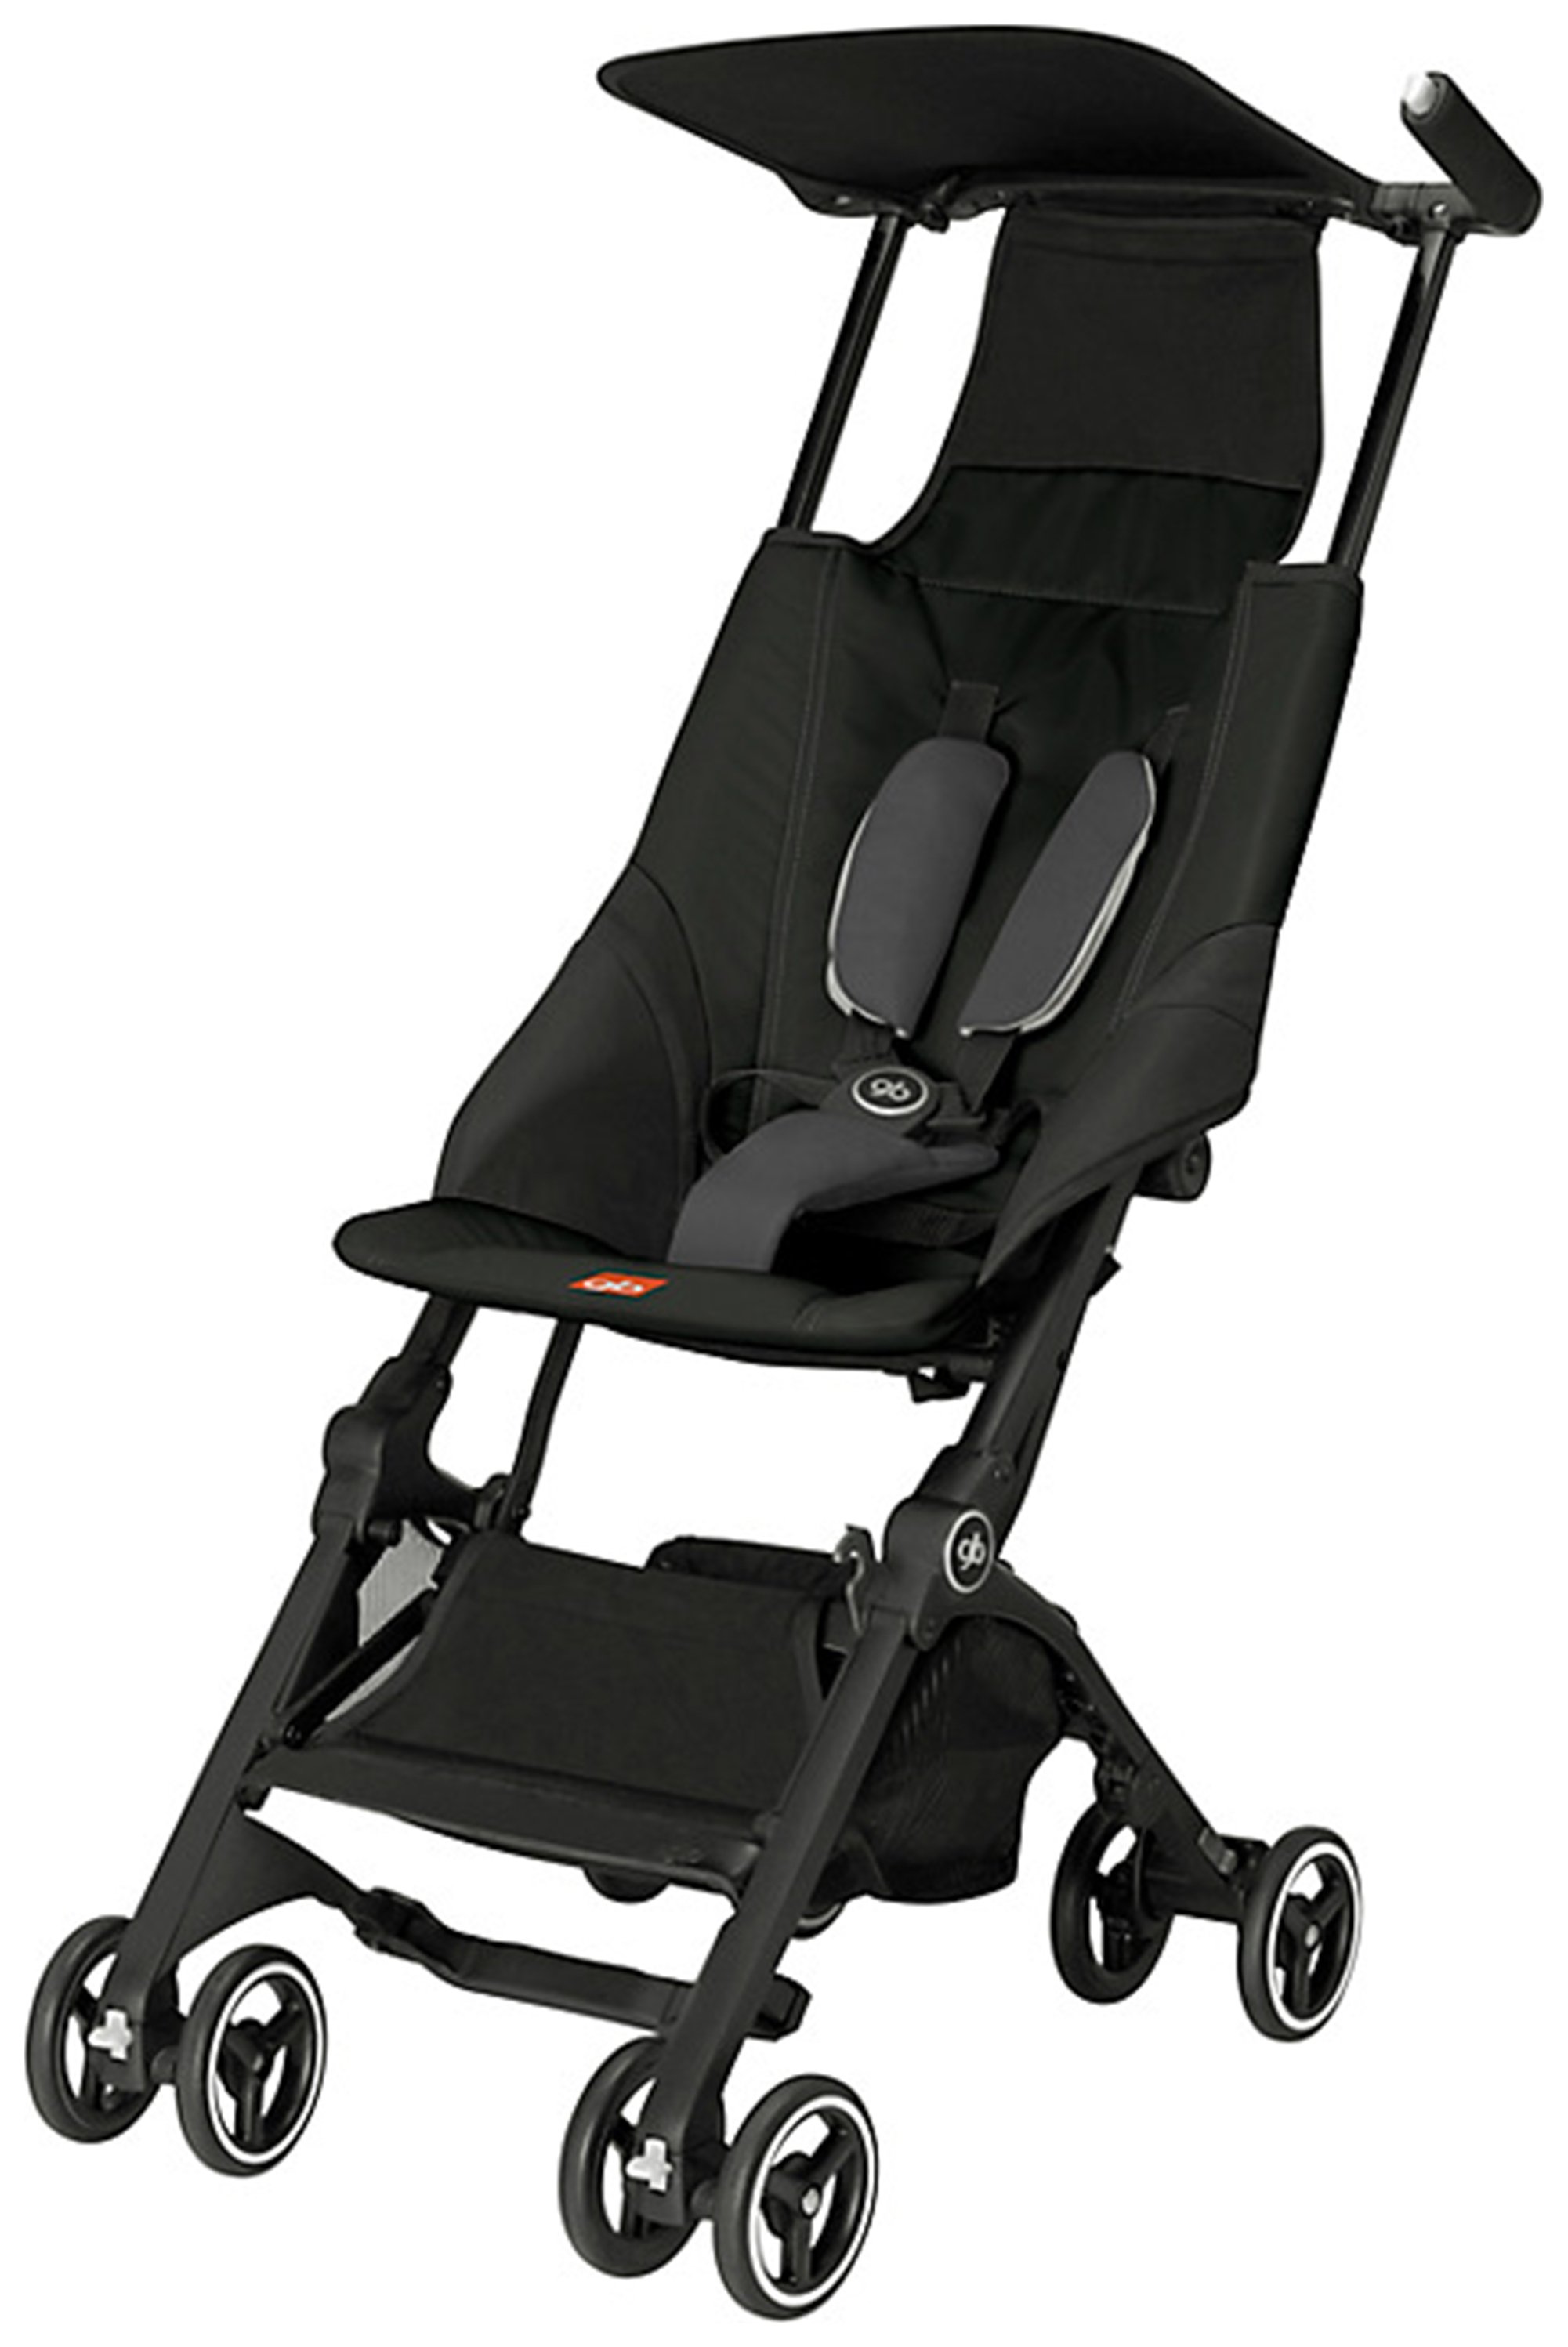 icandy pushchair review